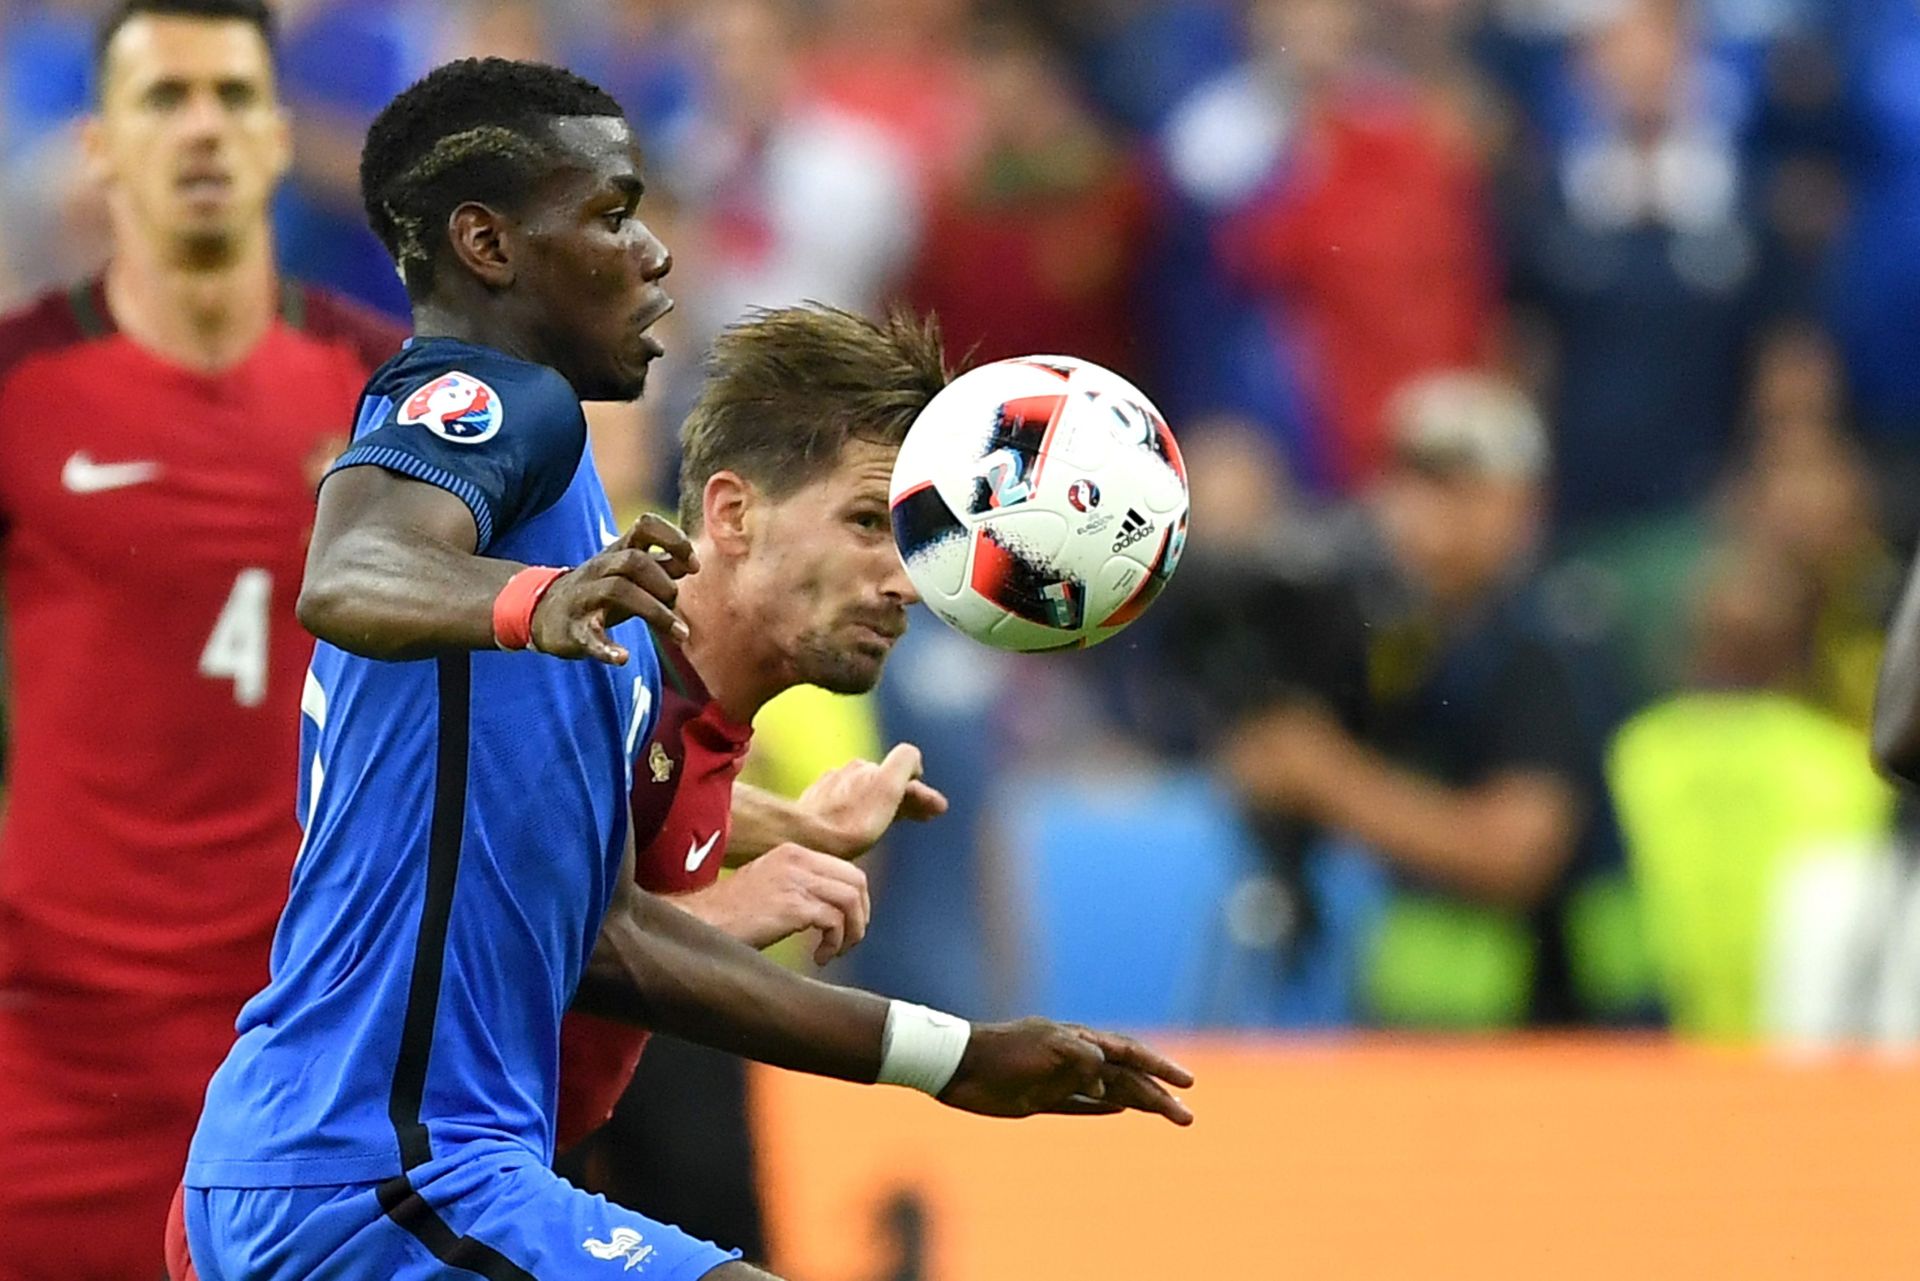 epa05419386 Paul Pogba (L) of France in action against Adrien Silva of Portugal during the UEFA EURO 2016 Final match between Portugal and France at Stade de France in Saint-Denis, France, 10 July 2016.


(RESTRICTIONS APPLY: For editorial news reporting purposes only. Not used for commercial or marketing purposes without prior written approval of UEFA. Images must appear as still images and must not emulate match action video footage. Photographs published in online publications (whether via the Internet or otherwise) shall have an interval of at least 20 seconds between the posting.)  EPA/GEORGI LICOVSKI   EDITORIAL USE ONLY